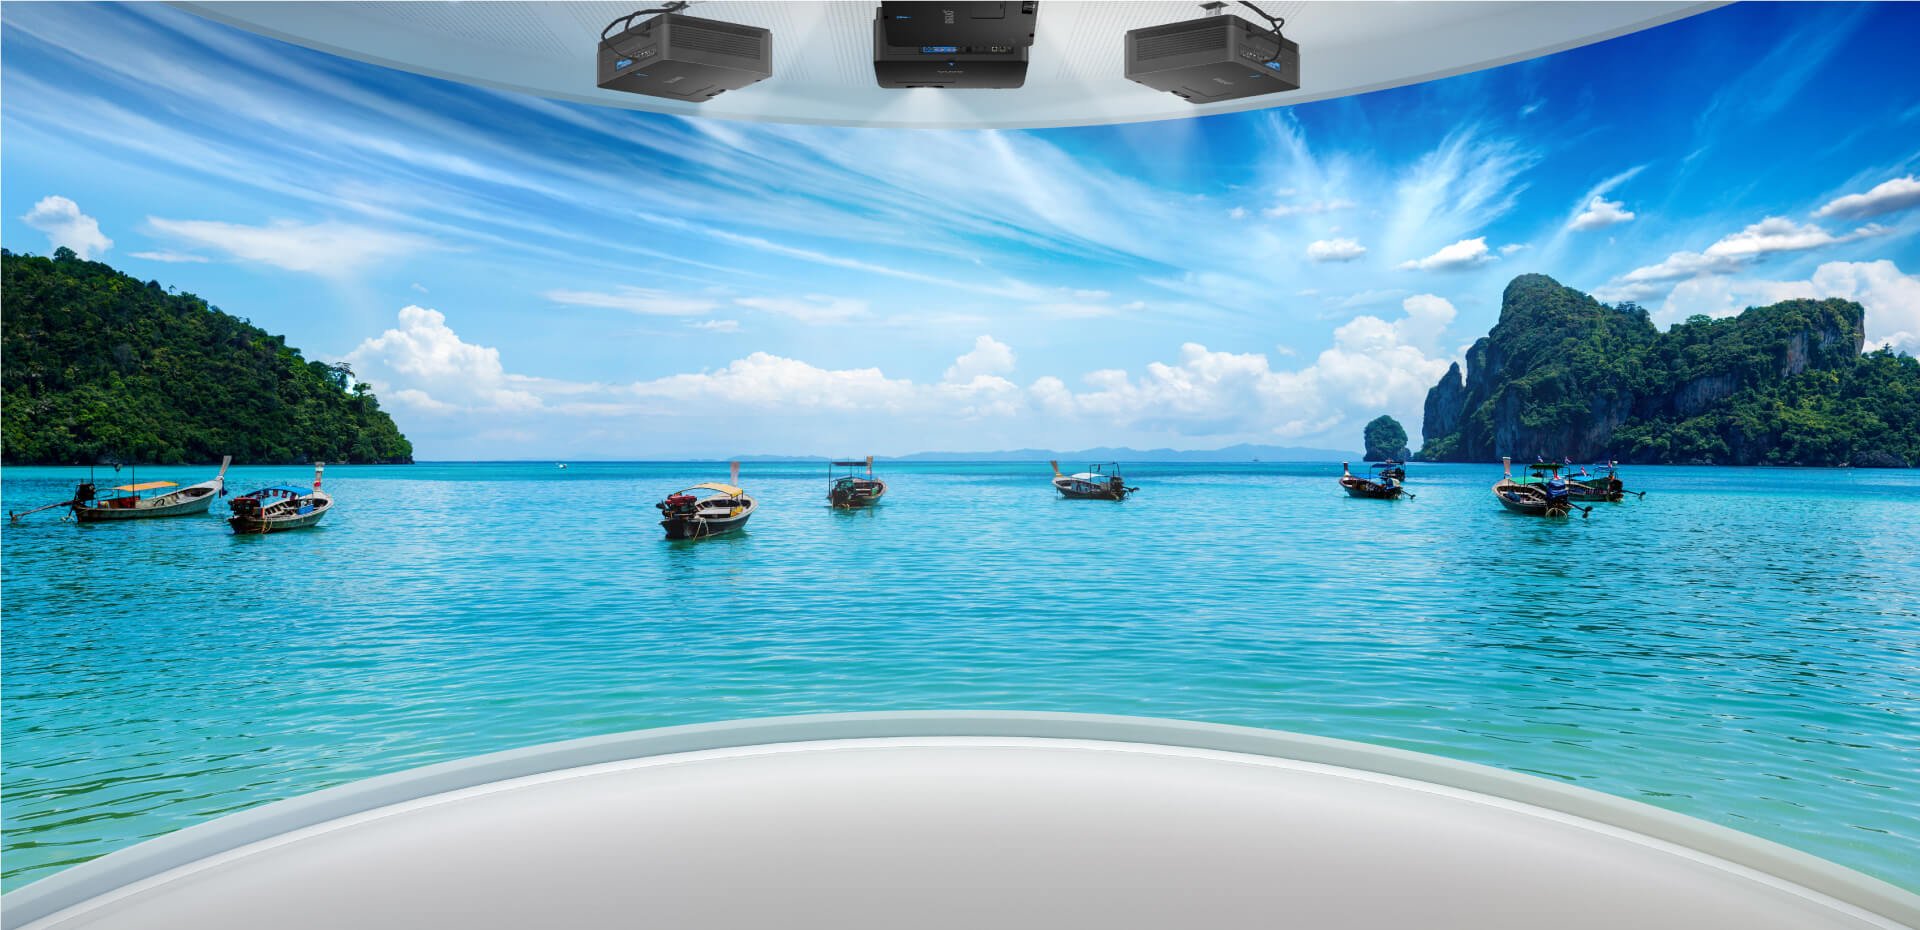 BenQ LU960ST Installation Projector with White Balance Calibration for Seamless Edge Blending in a panoramic view for flight simulation